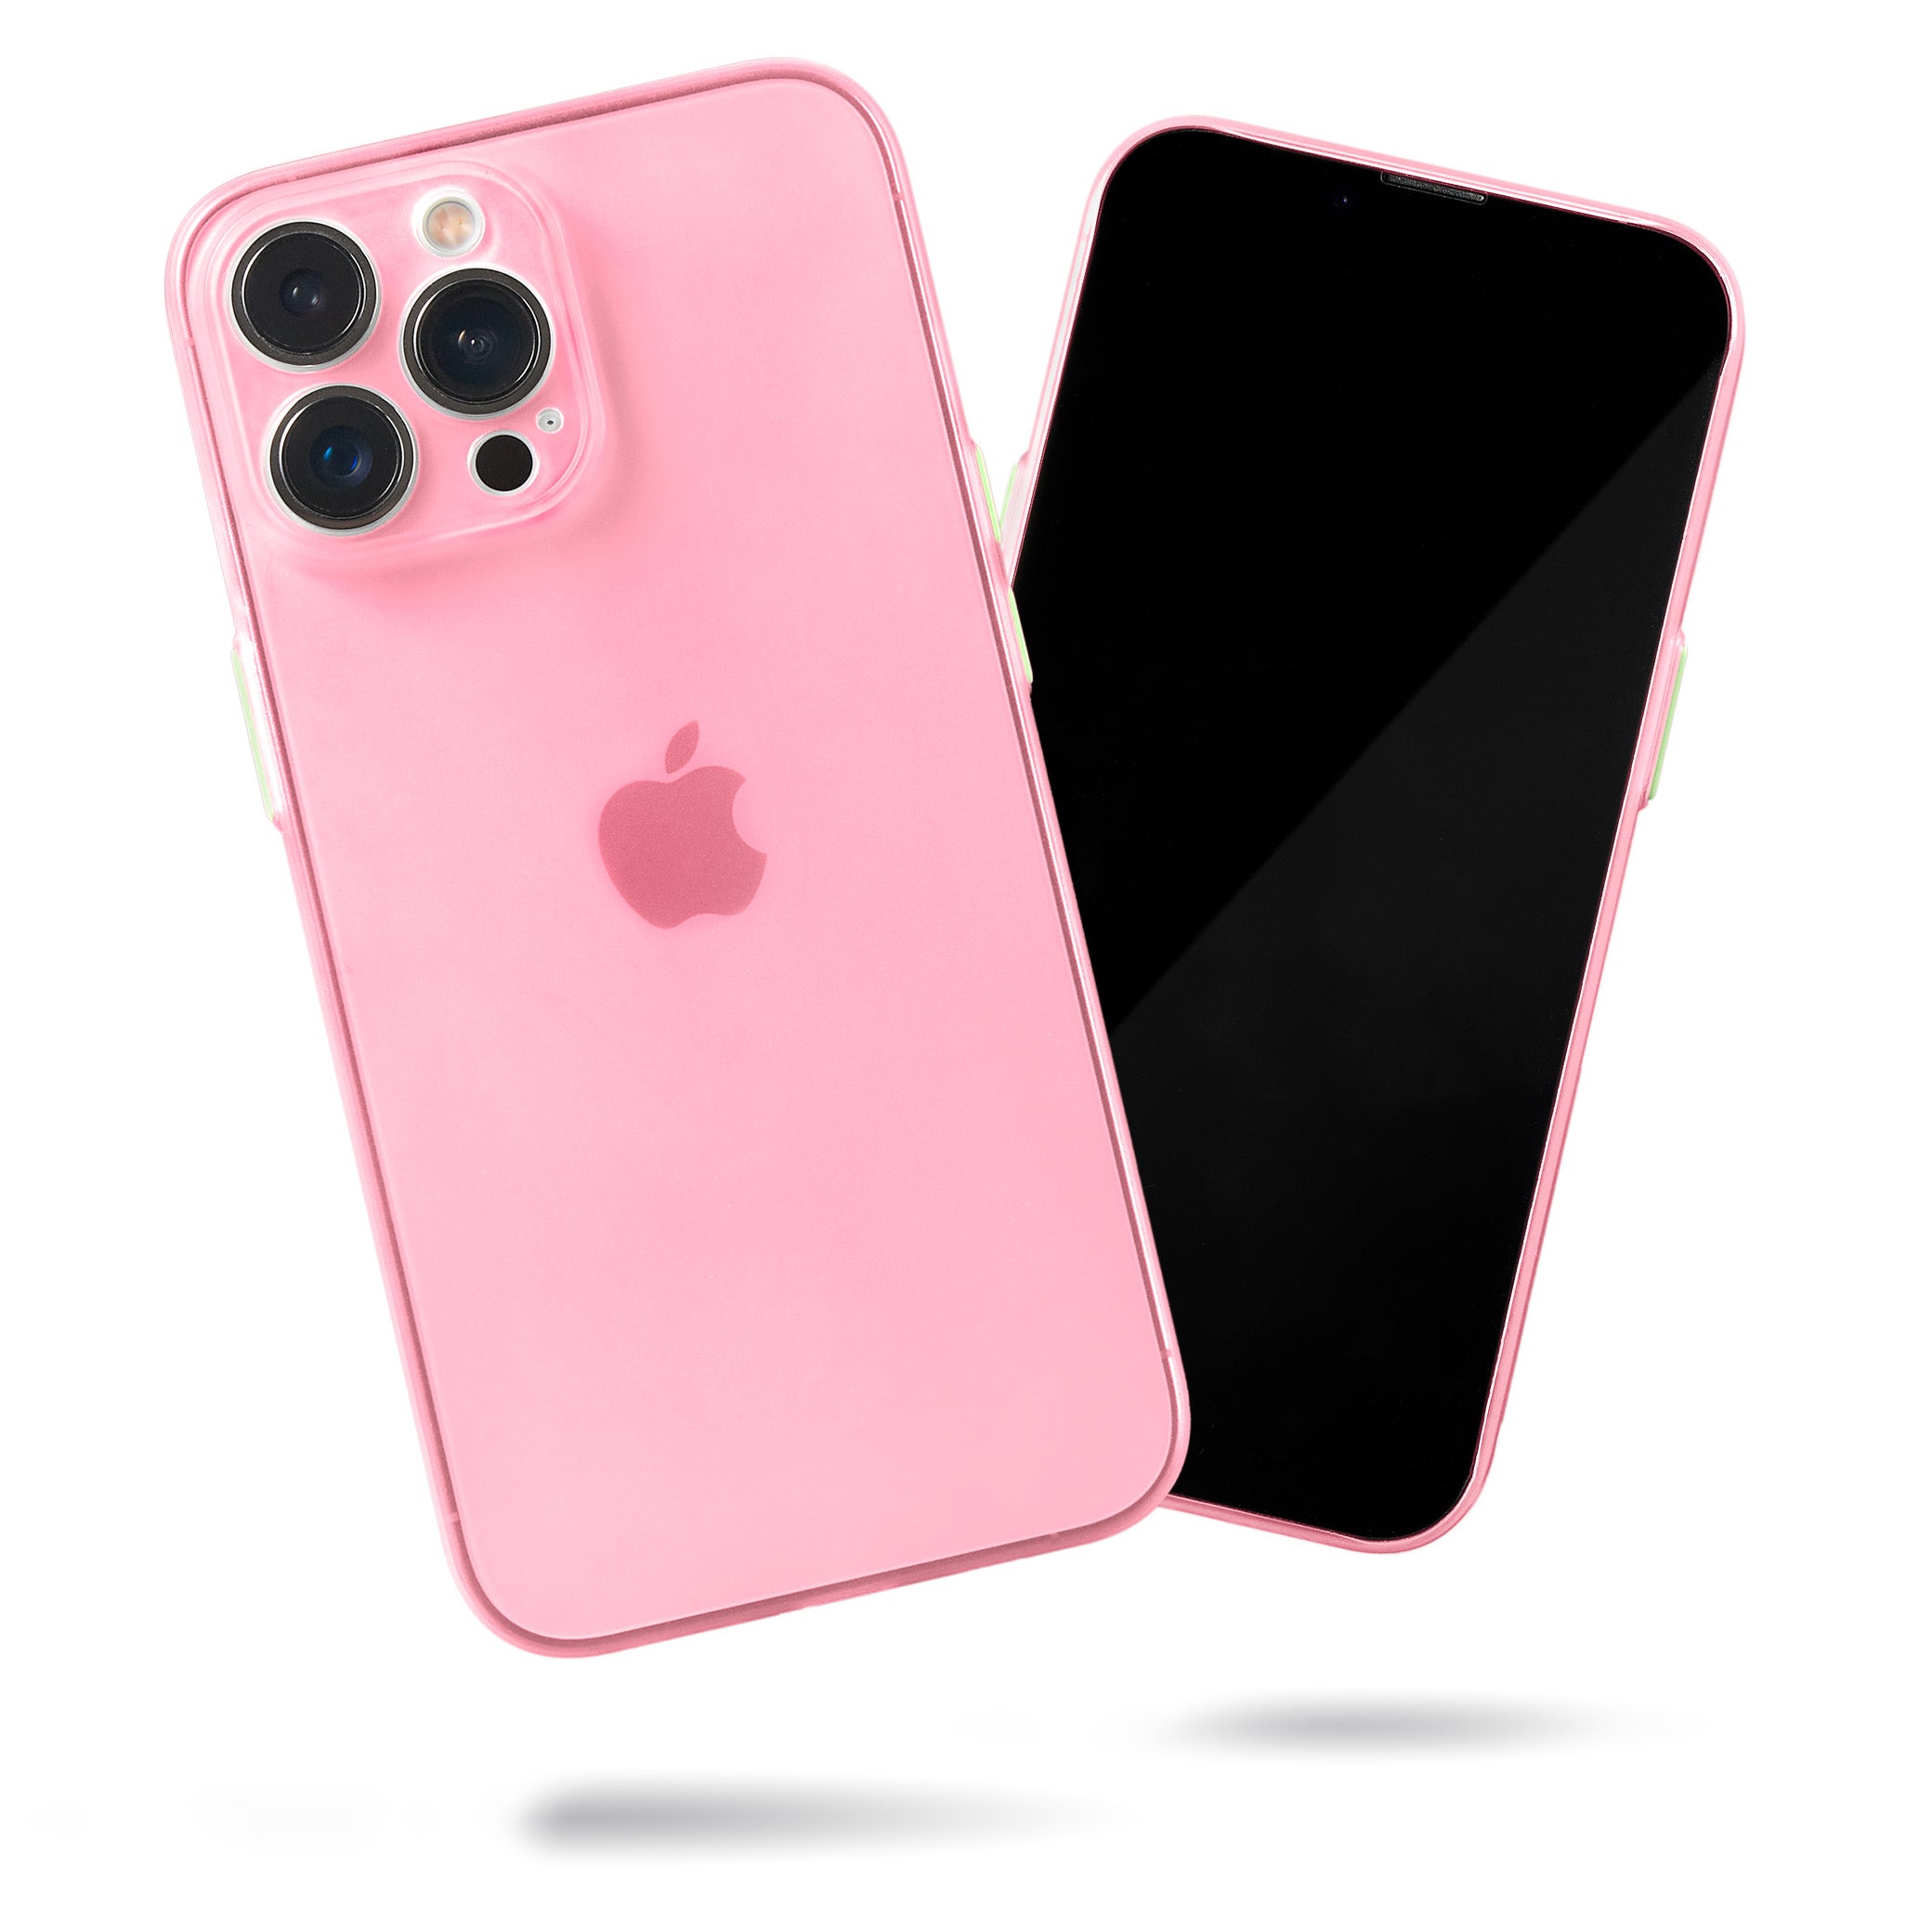 Super Slim Case 2.0 for iPhone 13 Pro Max - Pink Cotton Candy